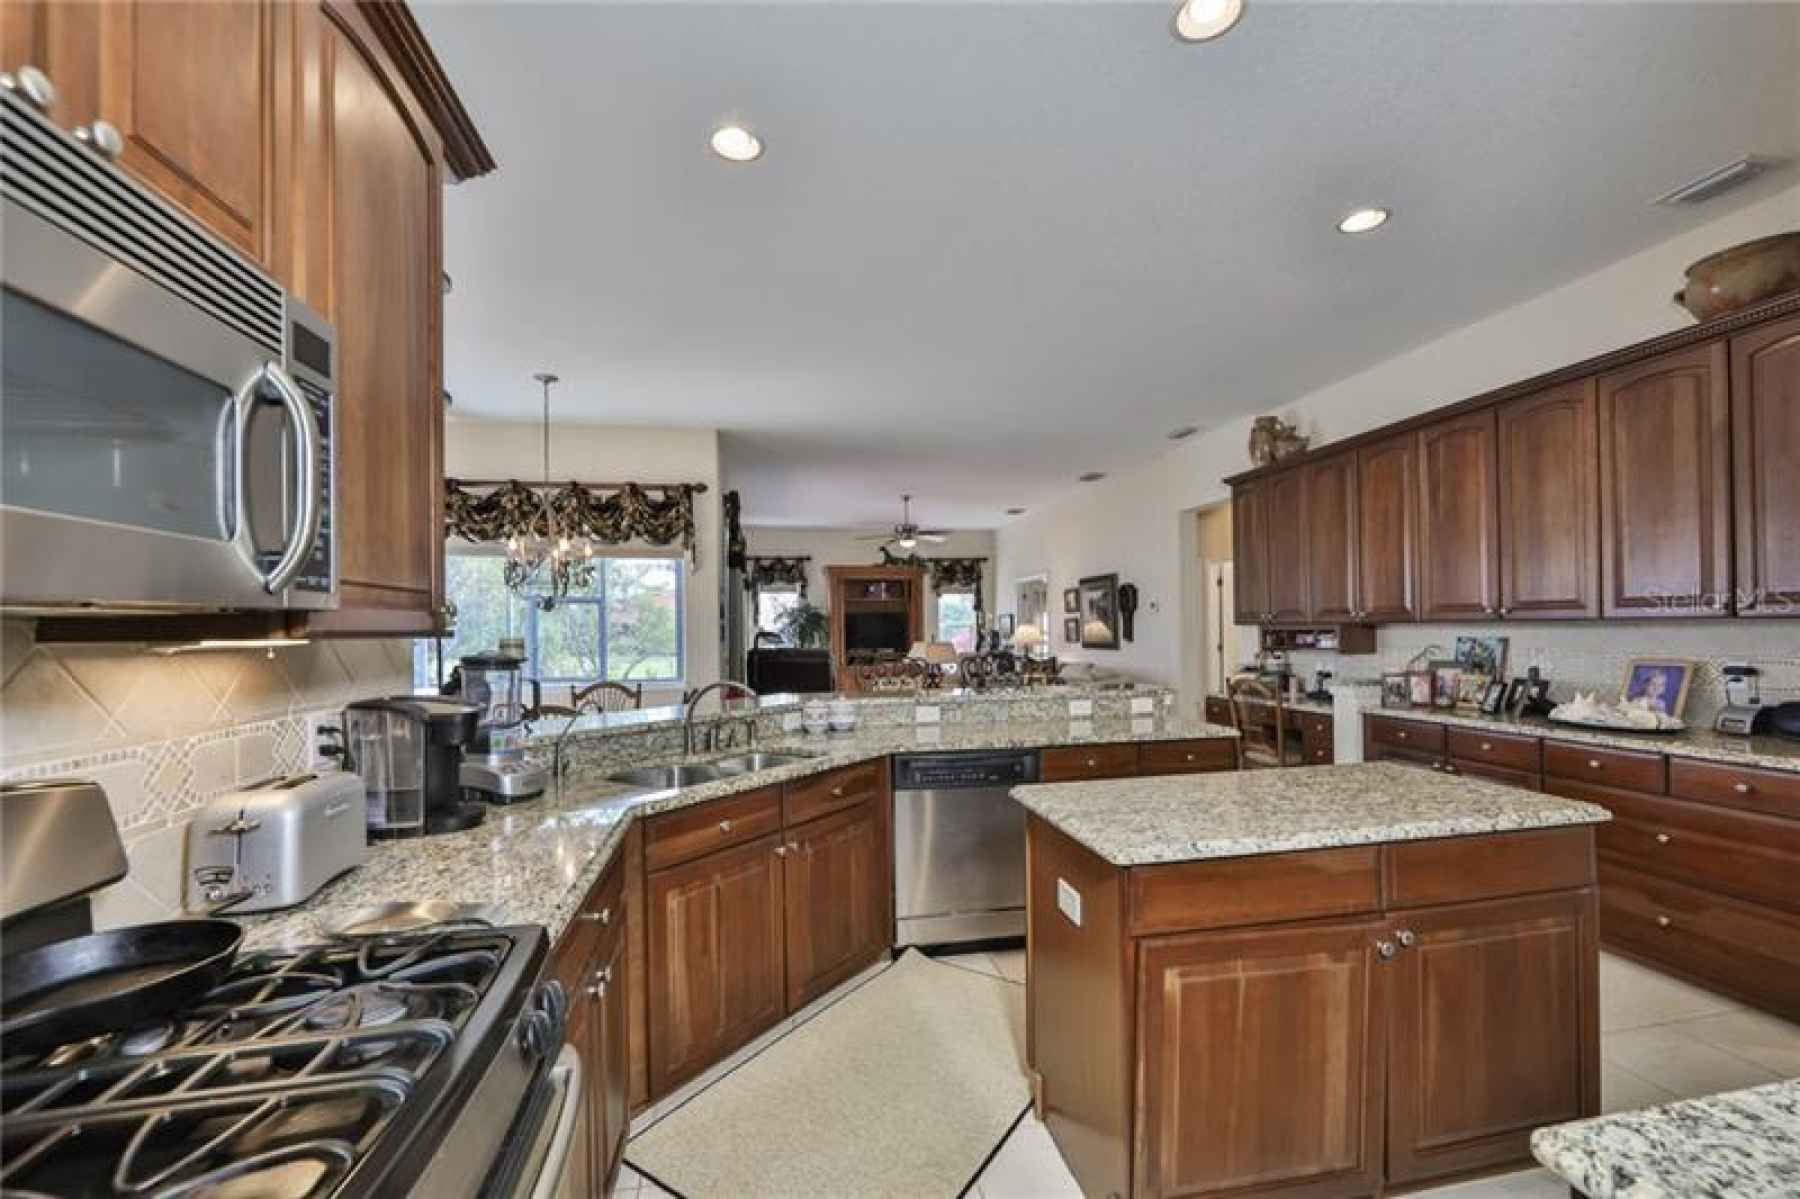 Natural gas stove, Stainless Top-End Appliances, Island and granite counters make this kitchen a coo